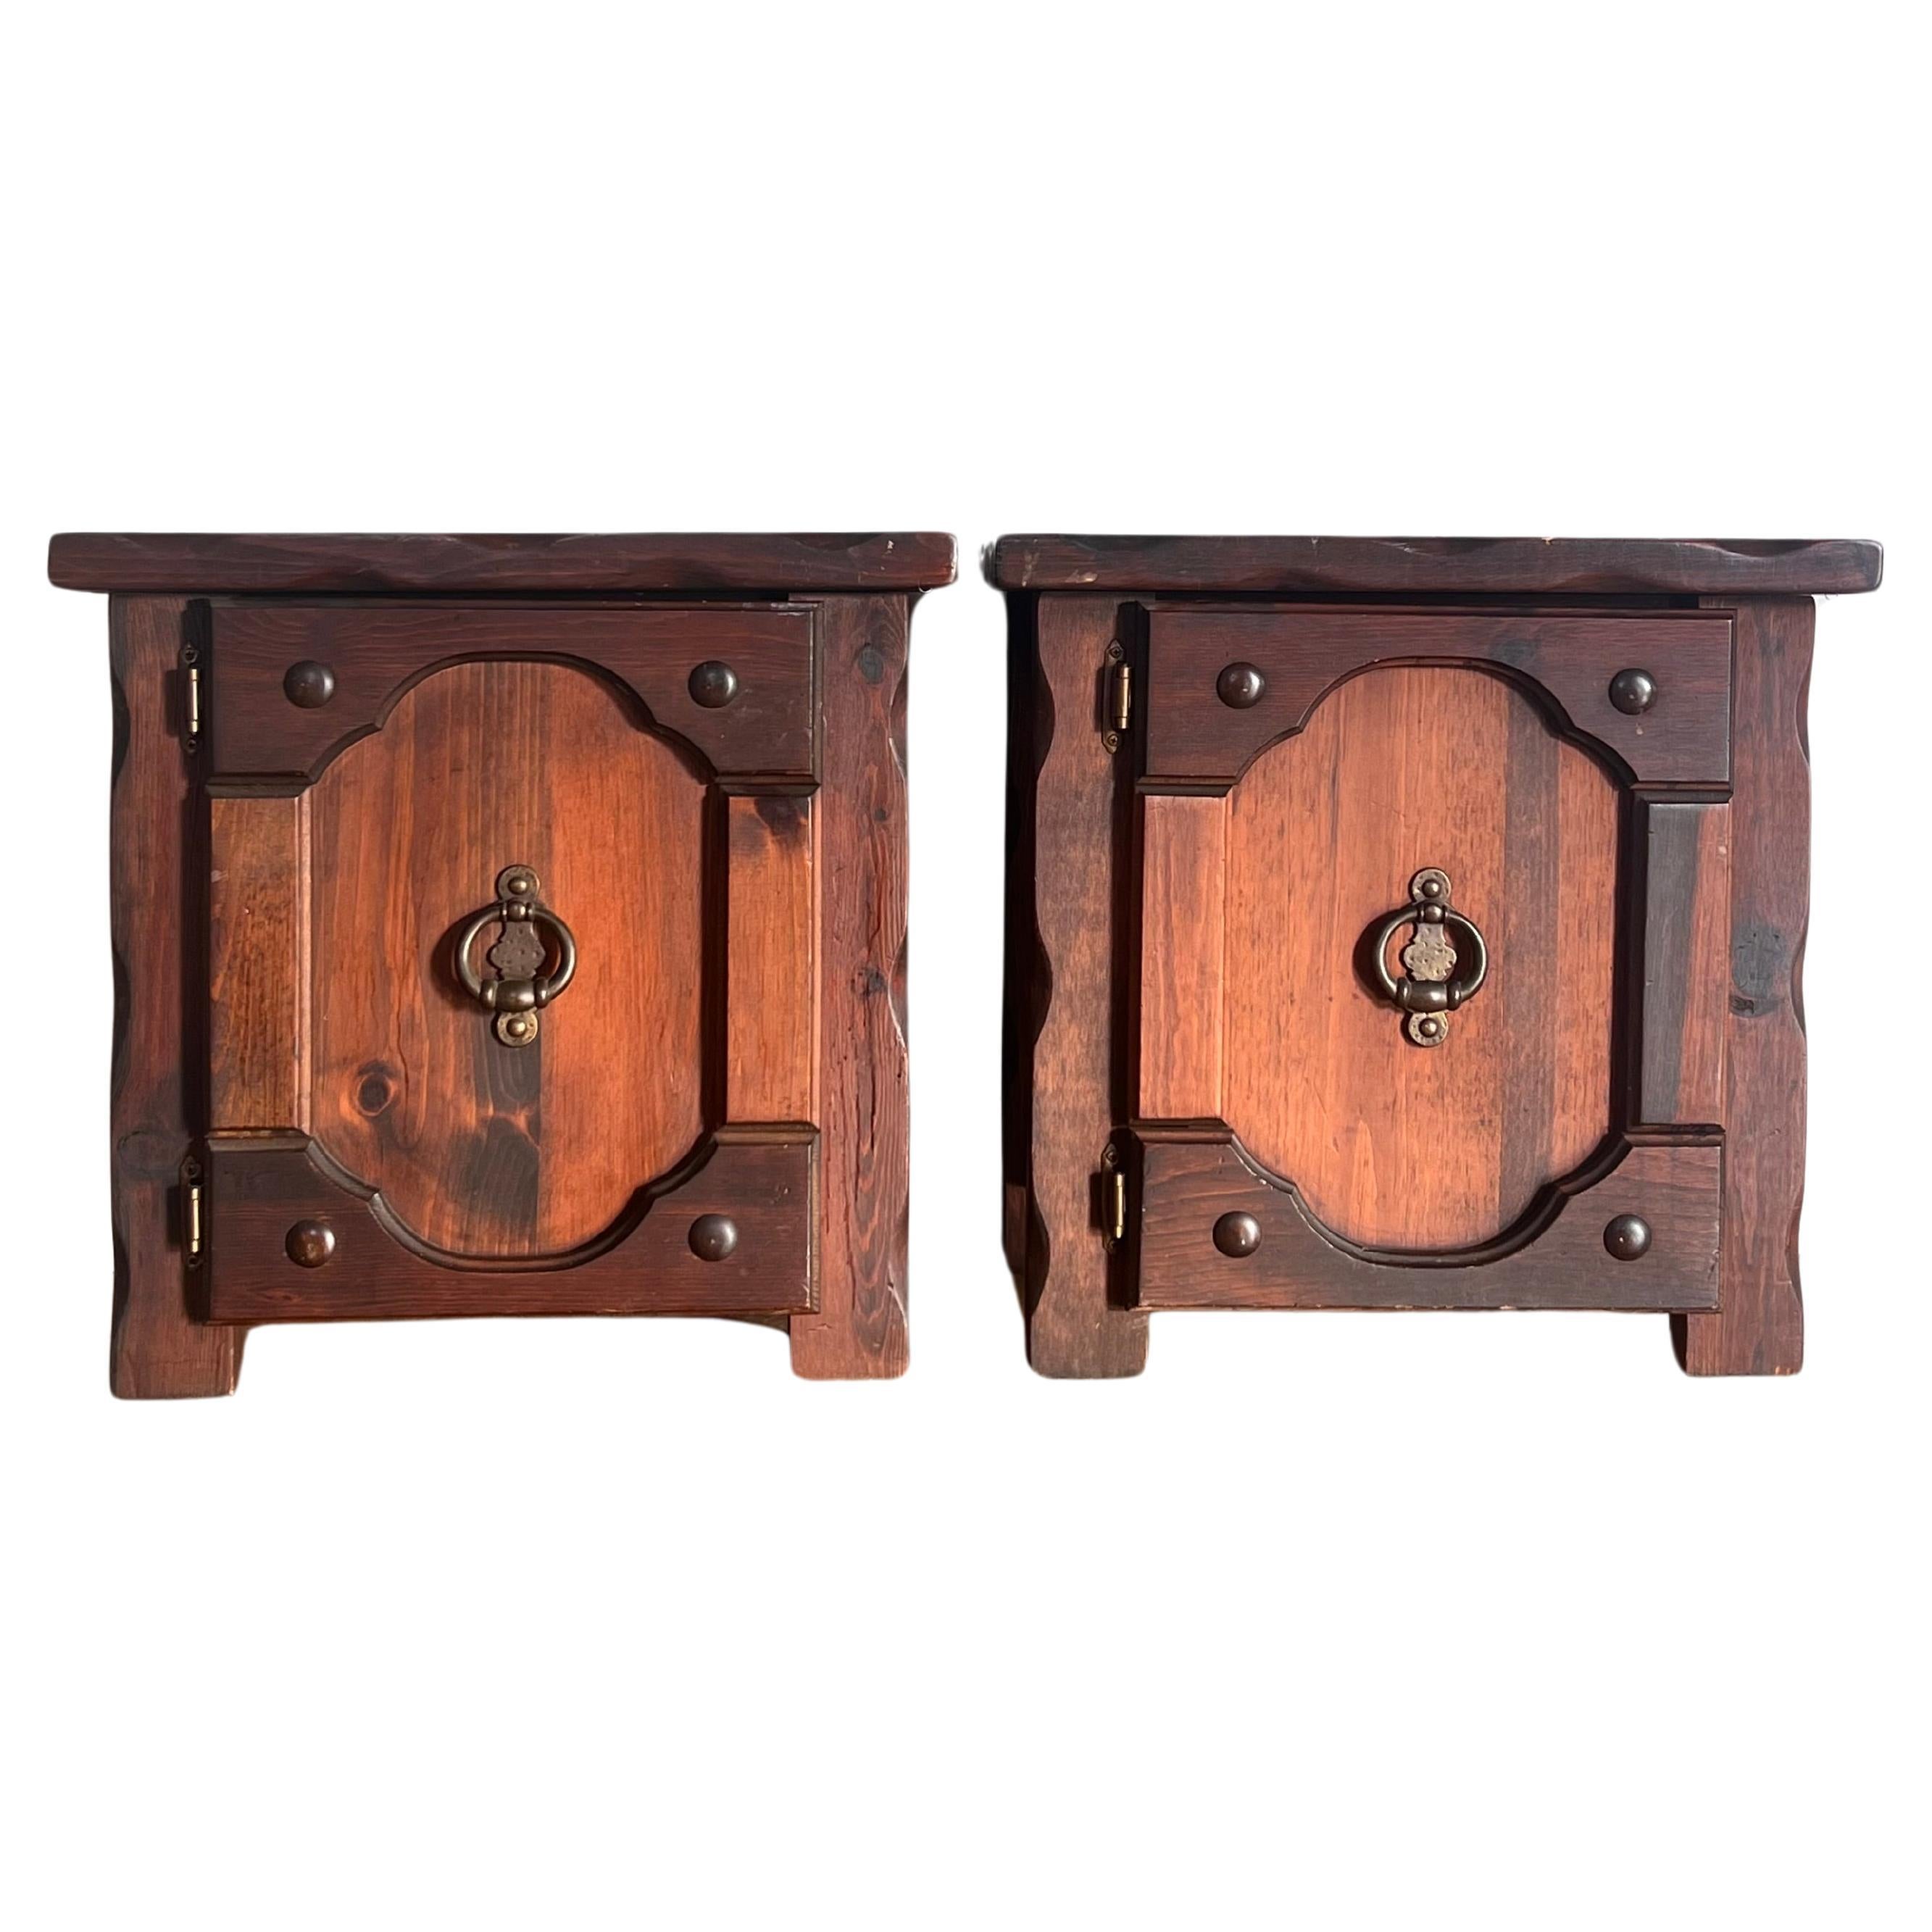 Mission craftsman gothic wooden nightstands with iron hardware, circa 1970 For Sale